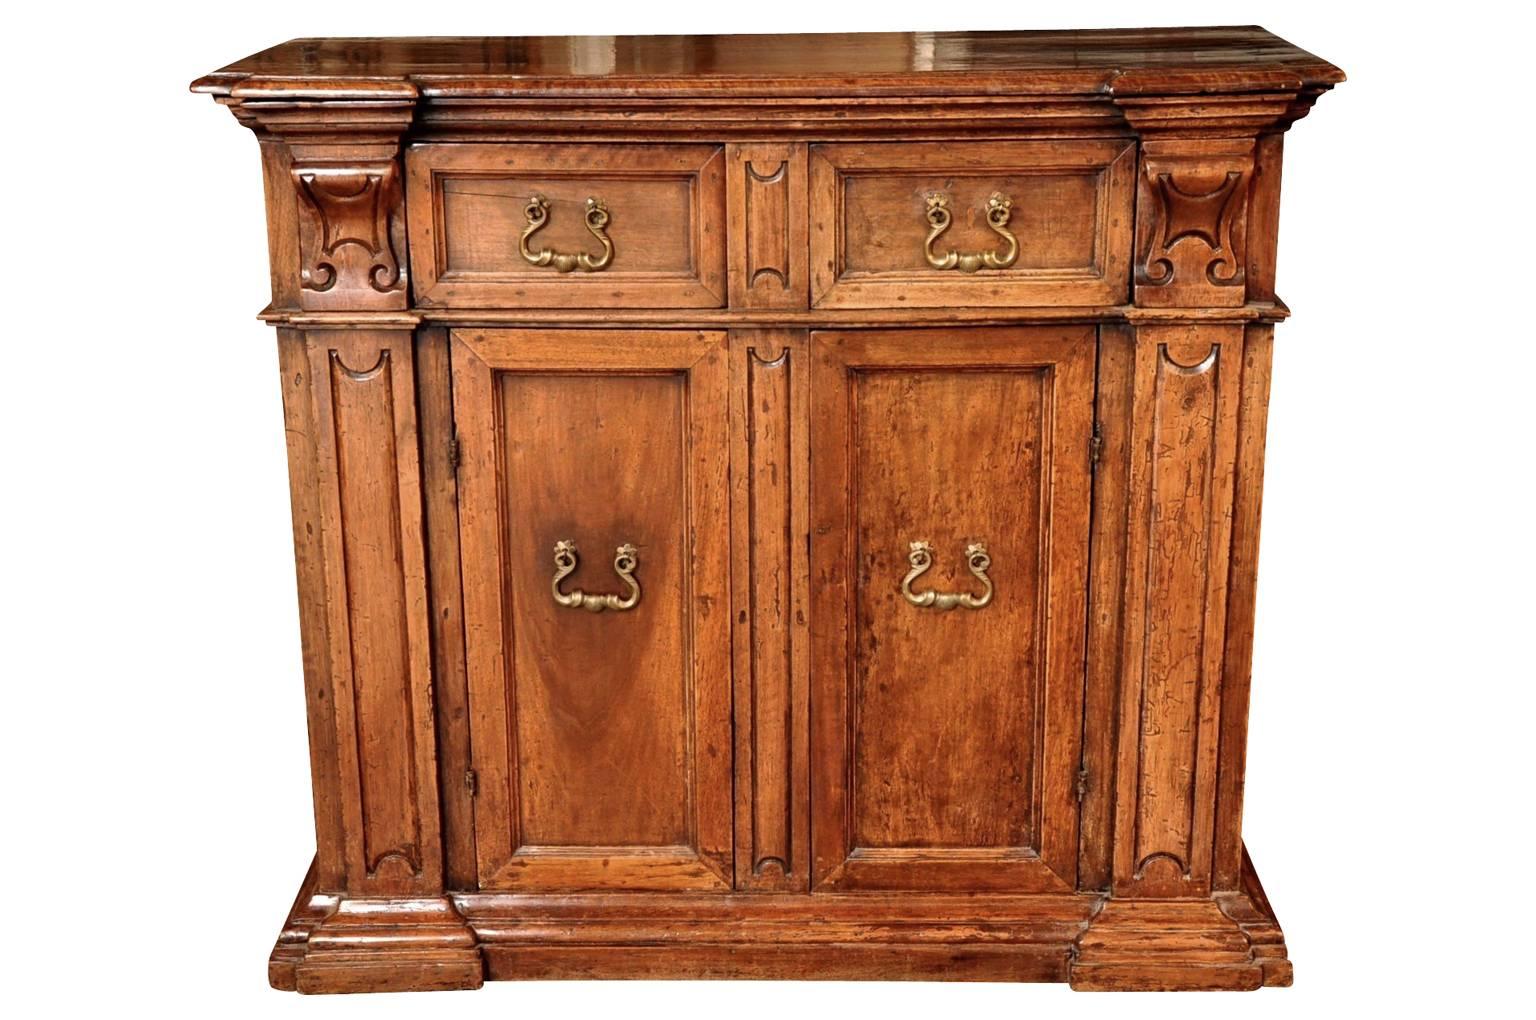 A very handsome late 18th century credenza from the Veneto region of Italy. Soundly constructed from walnut with double doors and five drawers.... Two that are seen and three that are hidden - very interesting.